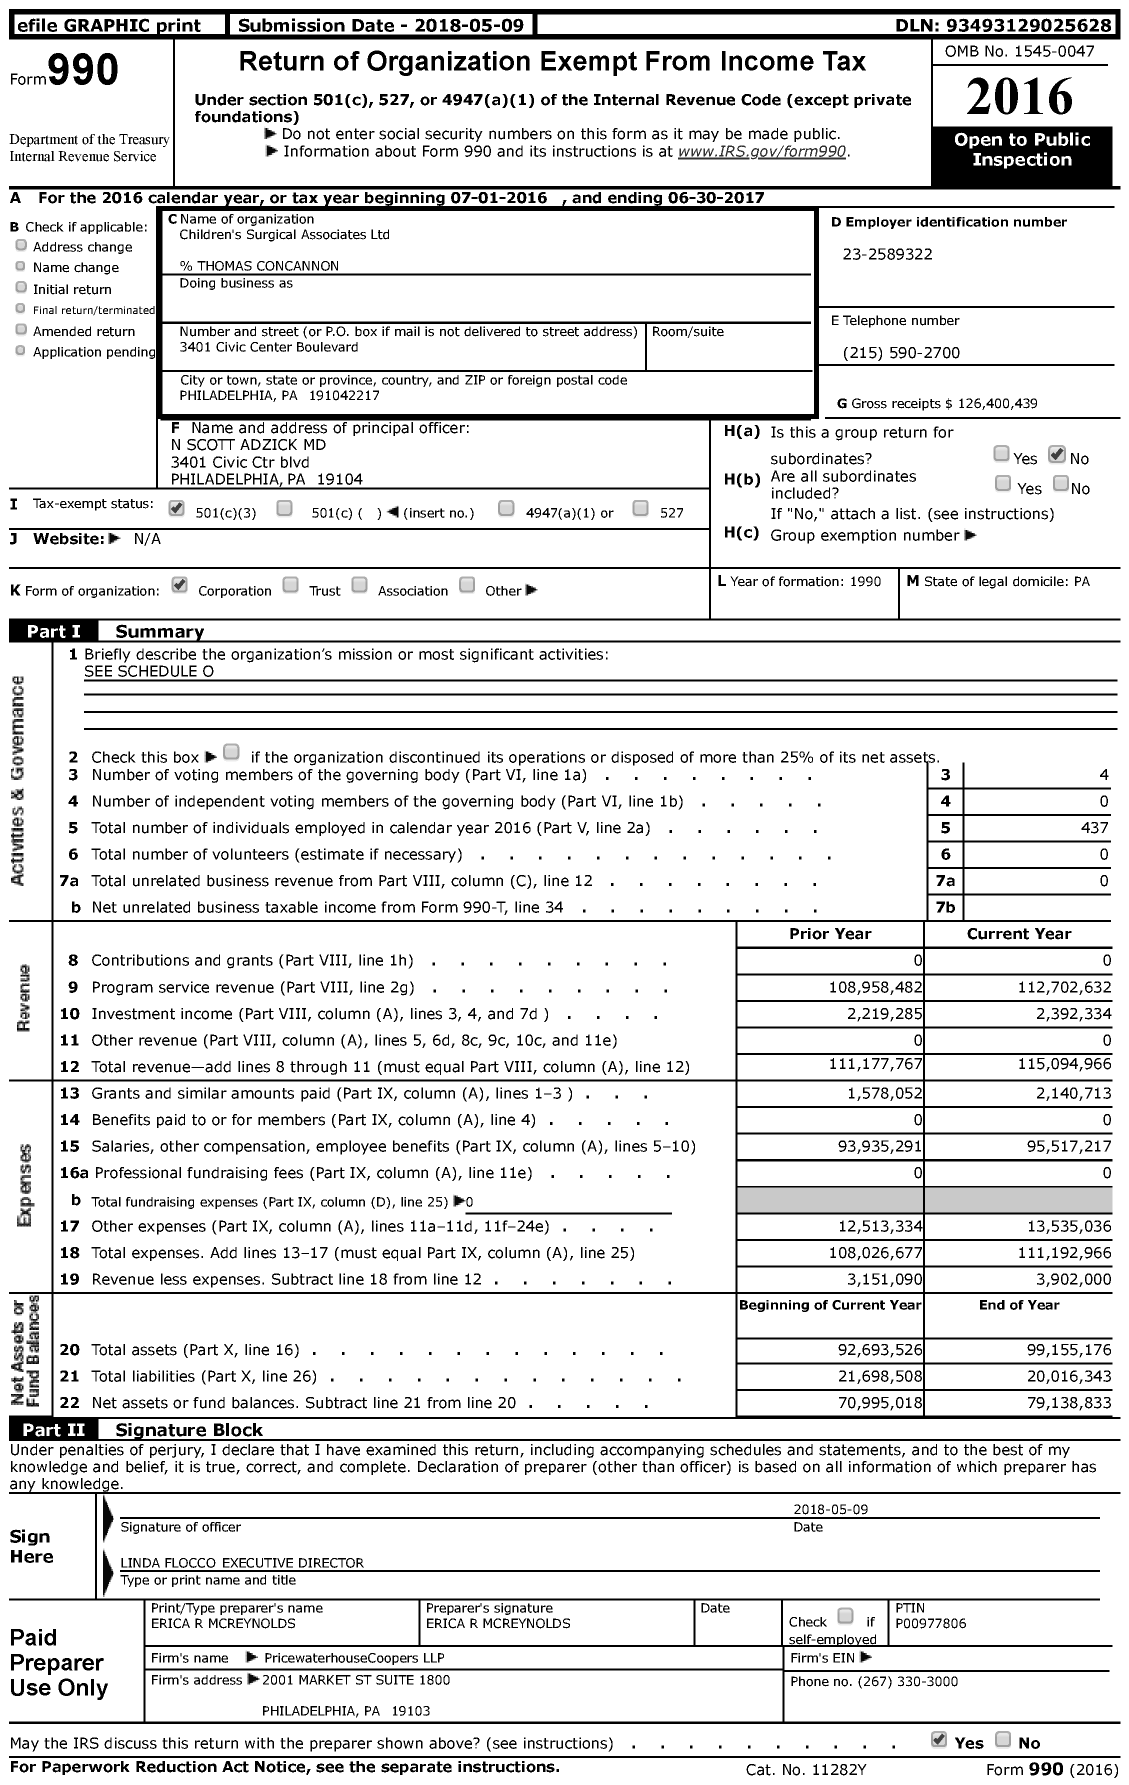 Image of first page of 2016 Form 990 for Children's Surgical Associates (CSA)